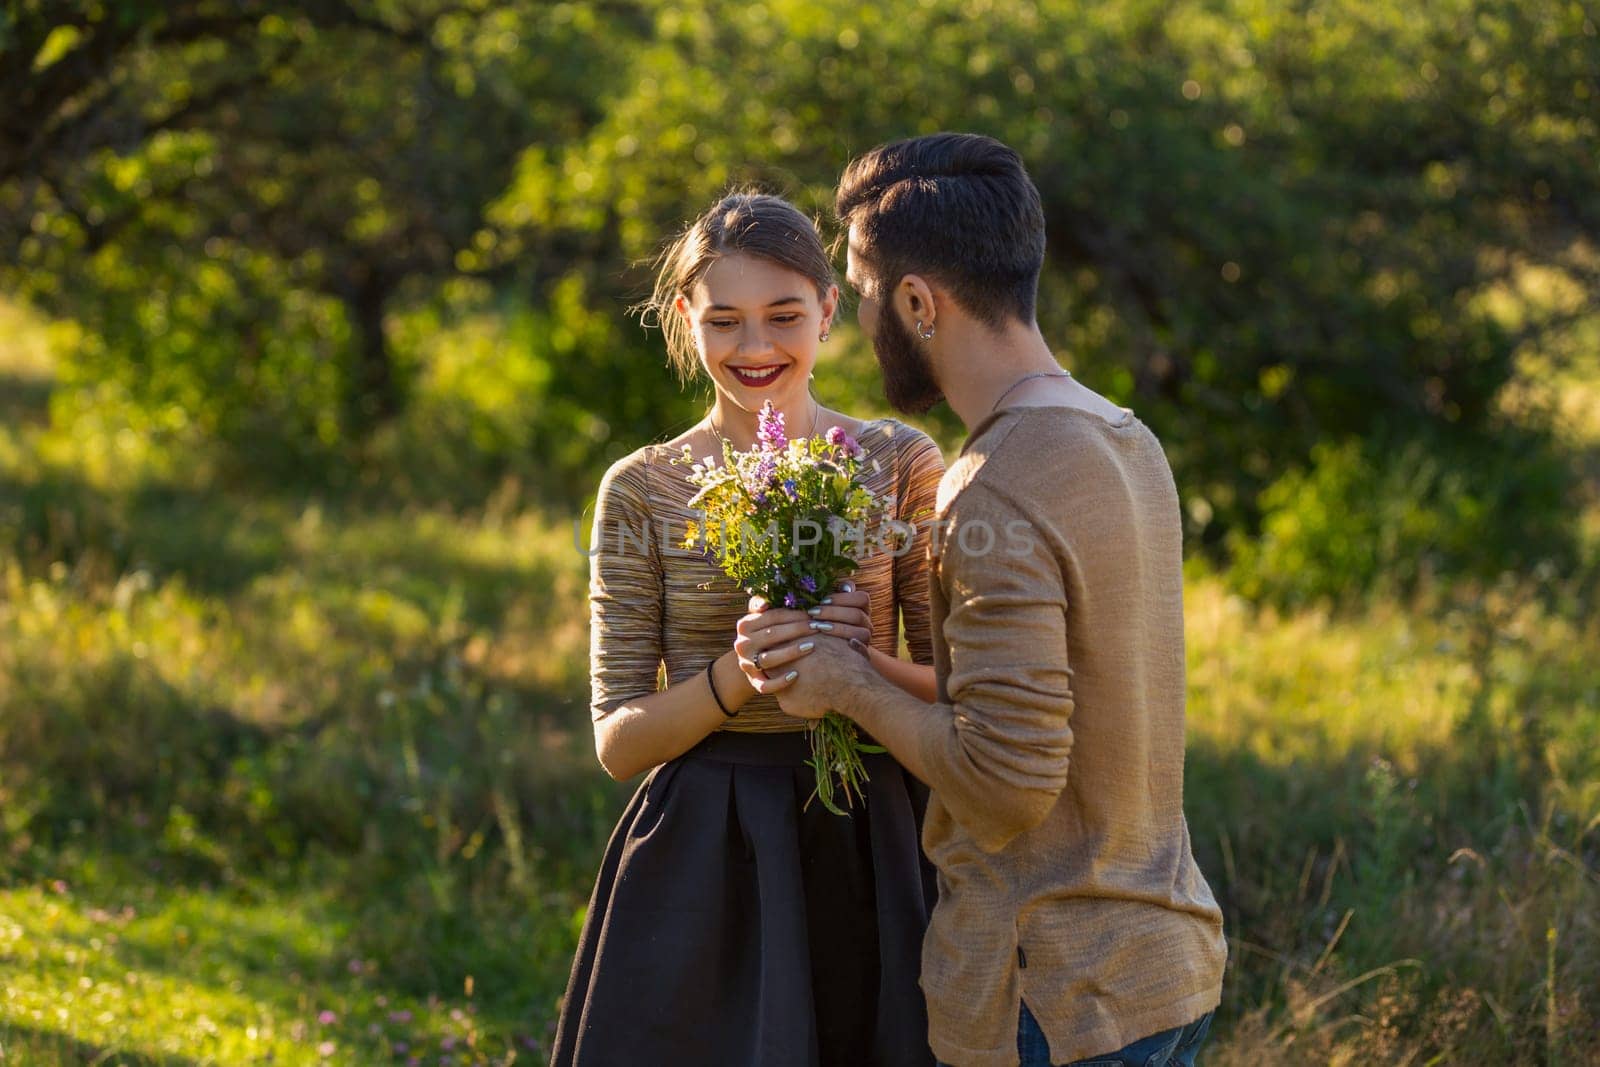 man giving wild flowers to his girlfriend